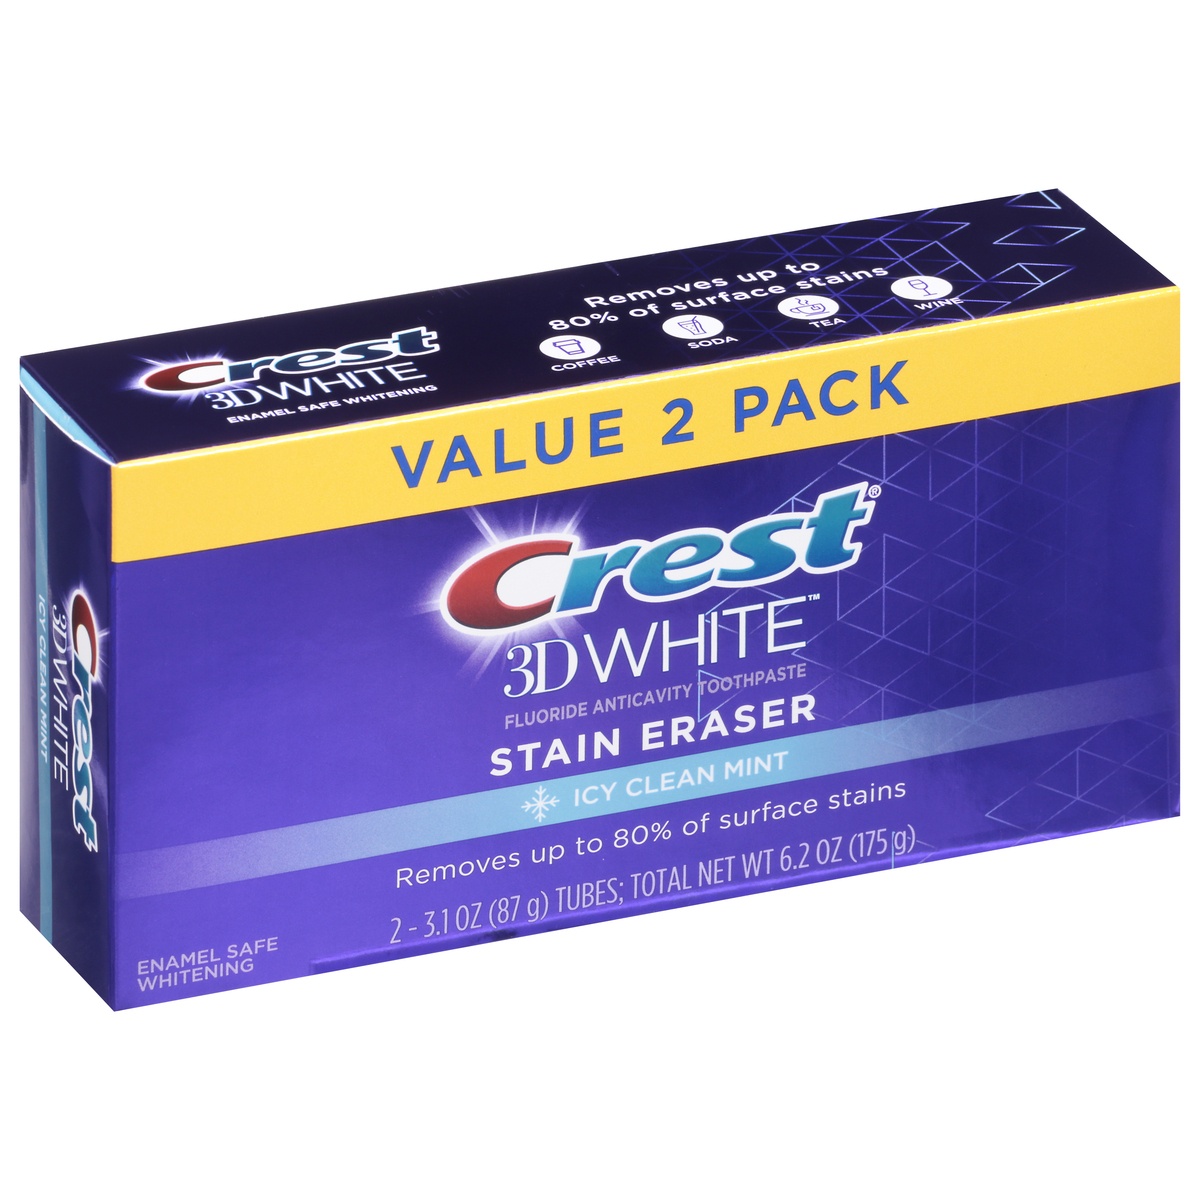 slide 2 of 10, Crest 3D White Stain Eraser Icy Clean Mint Toothpaste Value 2 Pack 2 - 3.1 oz Tubes, 6.1 oz